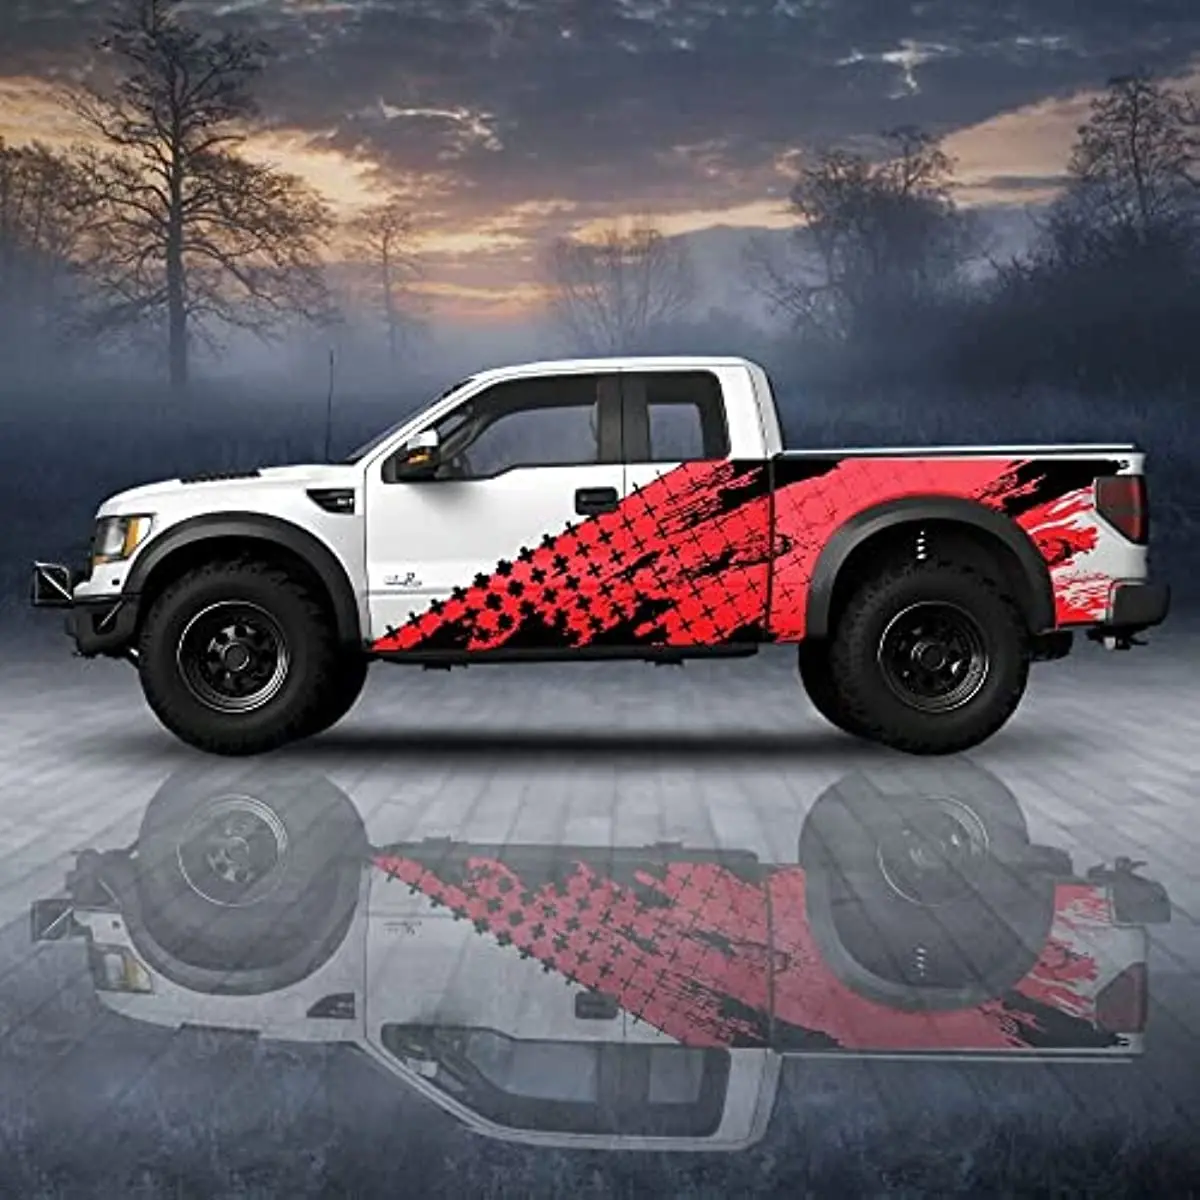 

Painted Truck Car Decal Car Spray Paint Large Vehicle Graphics Side Car Universal Size Car Long Stripe Decal(Type1)